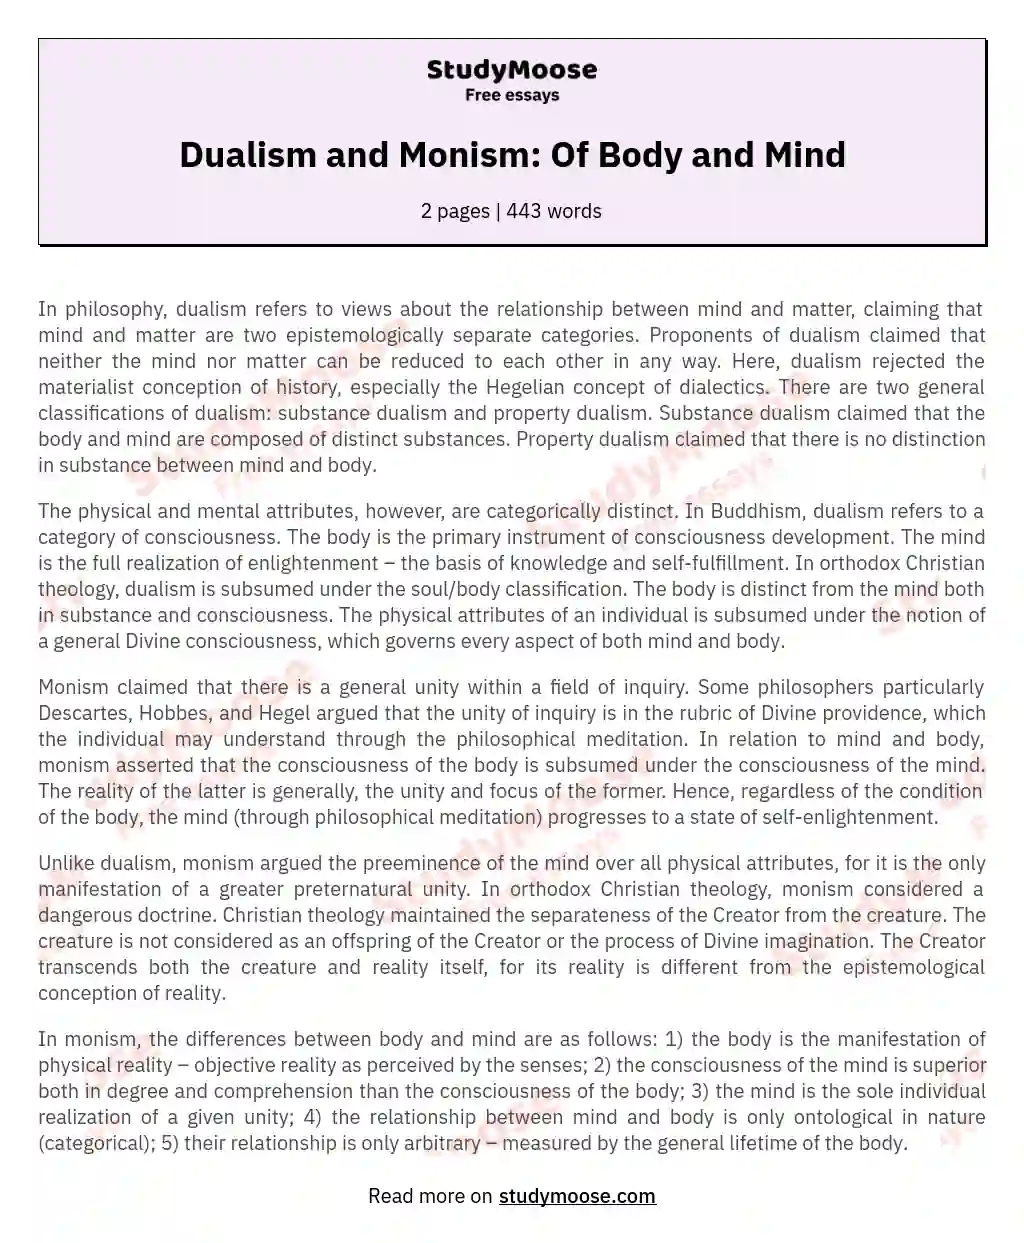 Dualism and Monism: Of Body and Mind essay